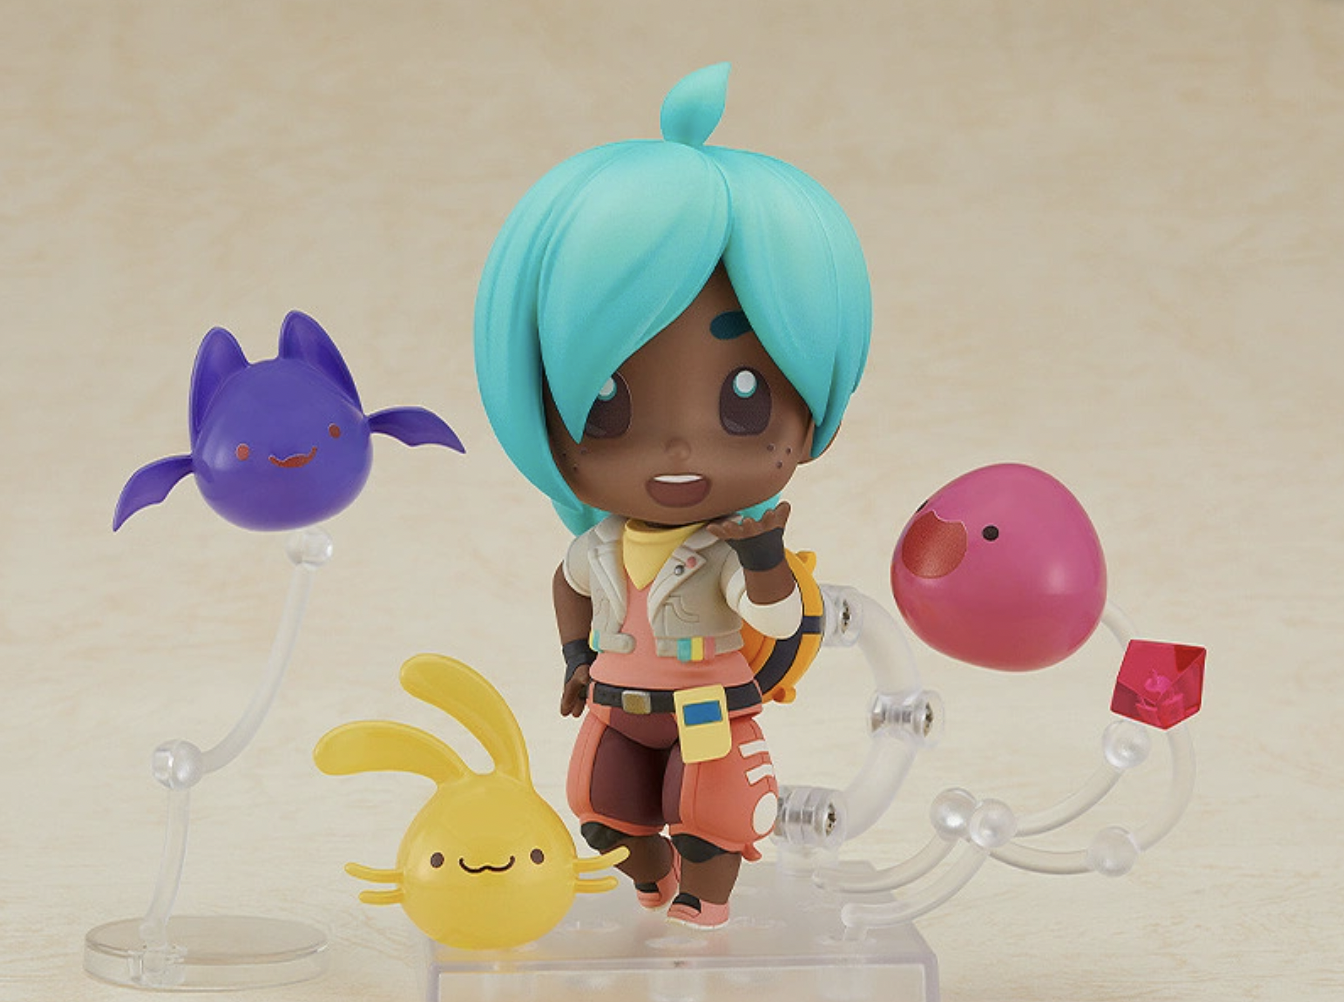 Slime Rancher 2 Nendoroid of Beatrix Comes with 3 Slimes - Siliconera